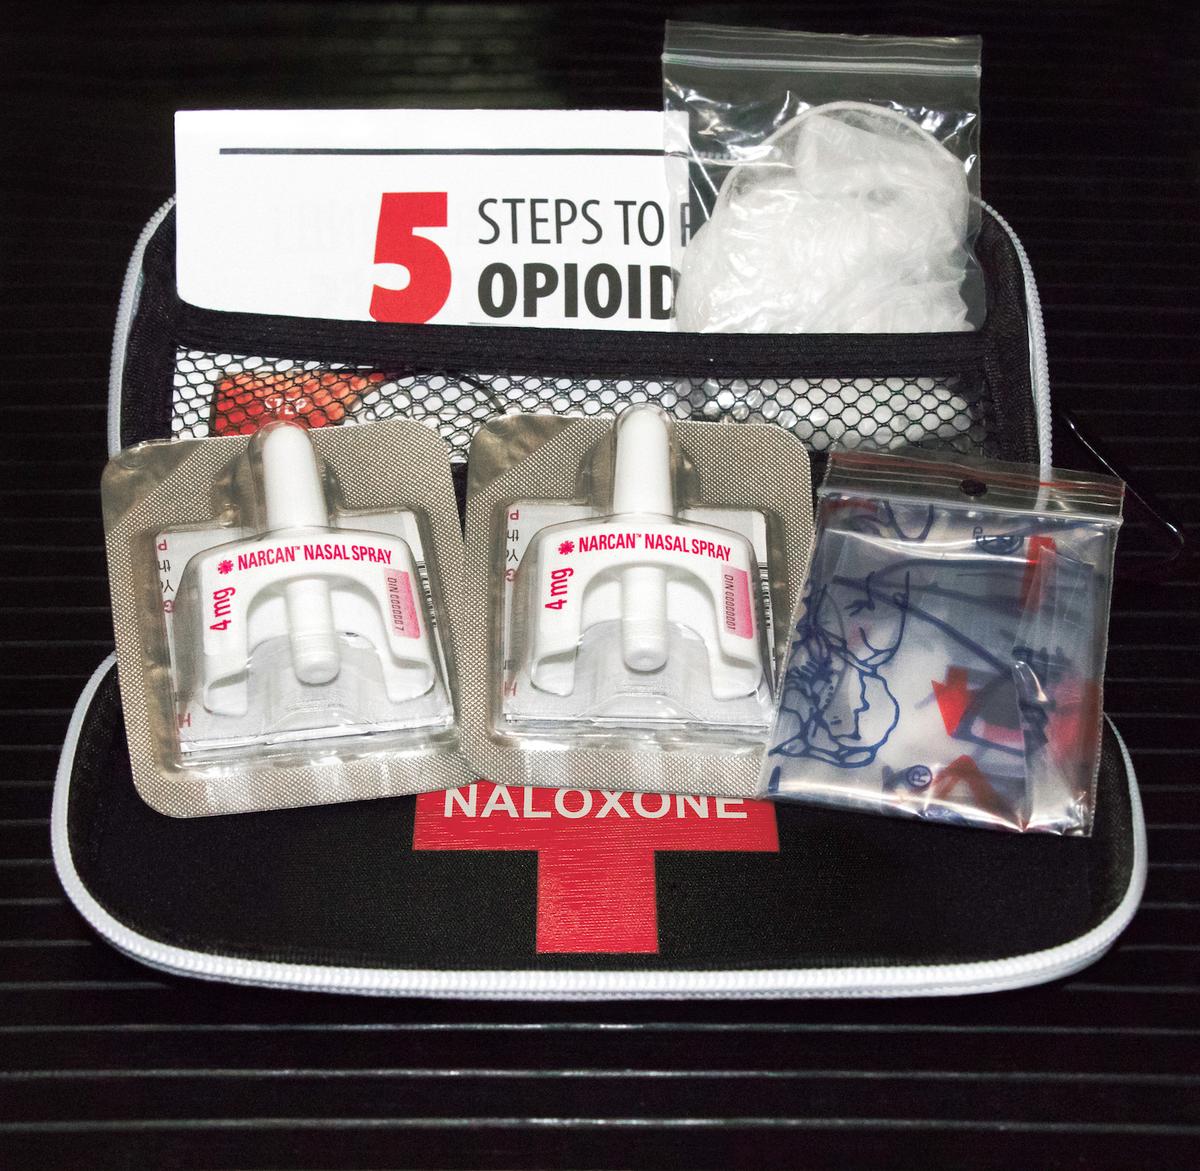 Naloxone kit with nasal delivery method of Narcan (Illustration - New2me86/Shutterstock)